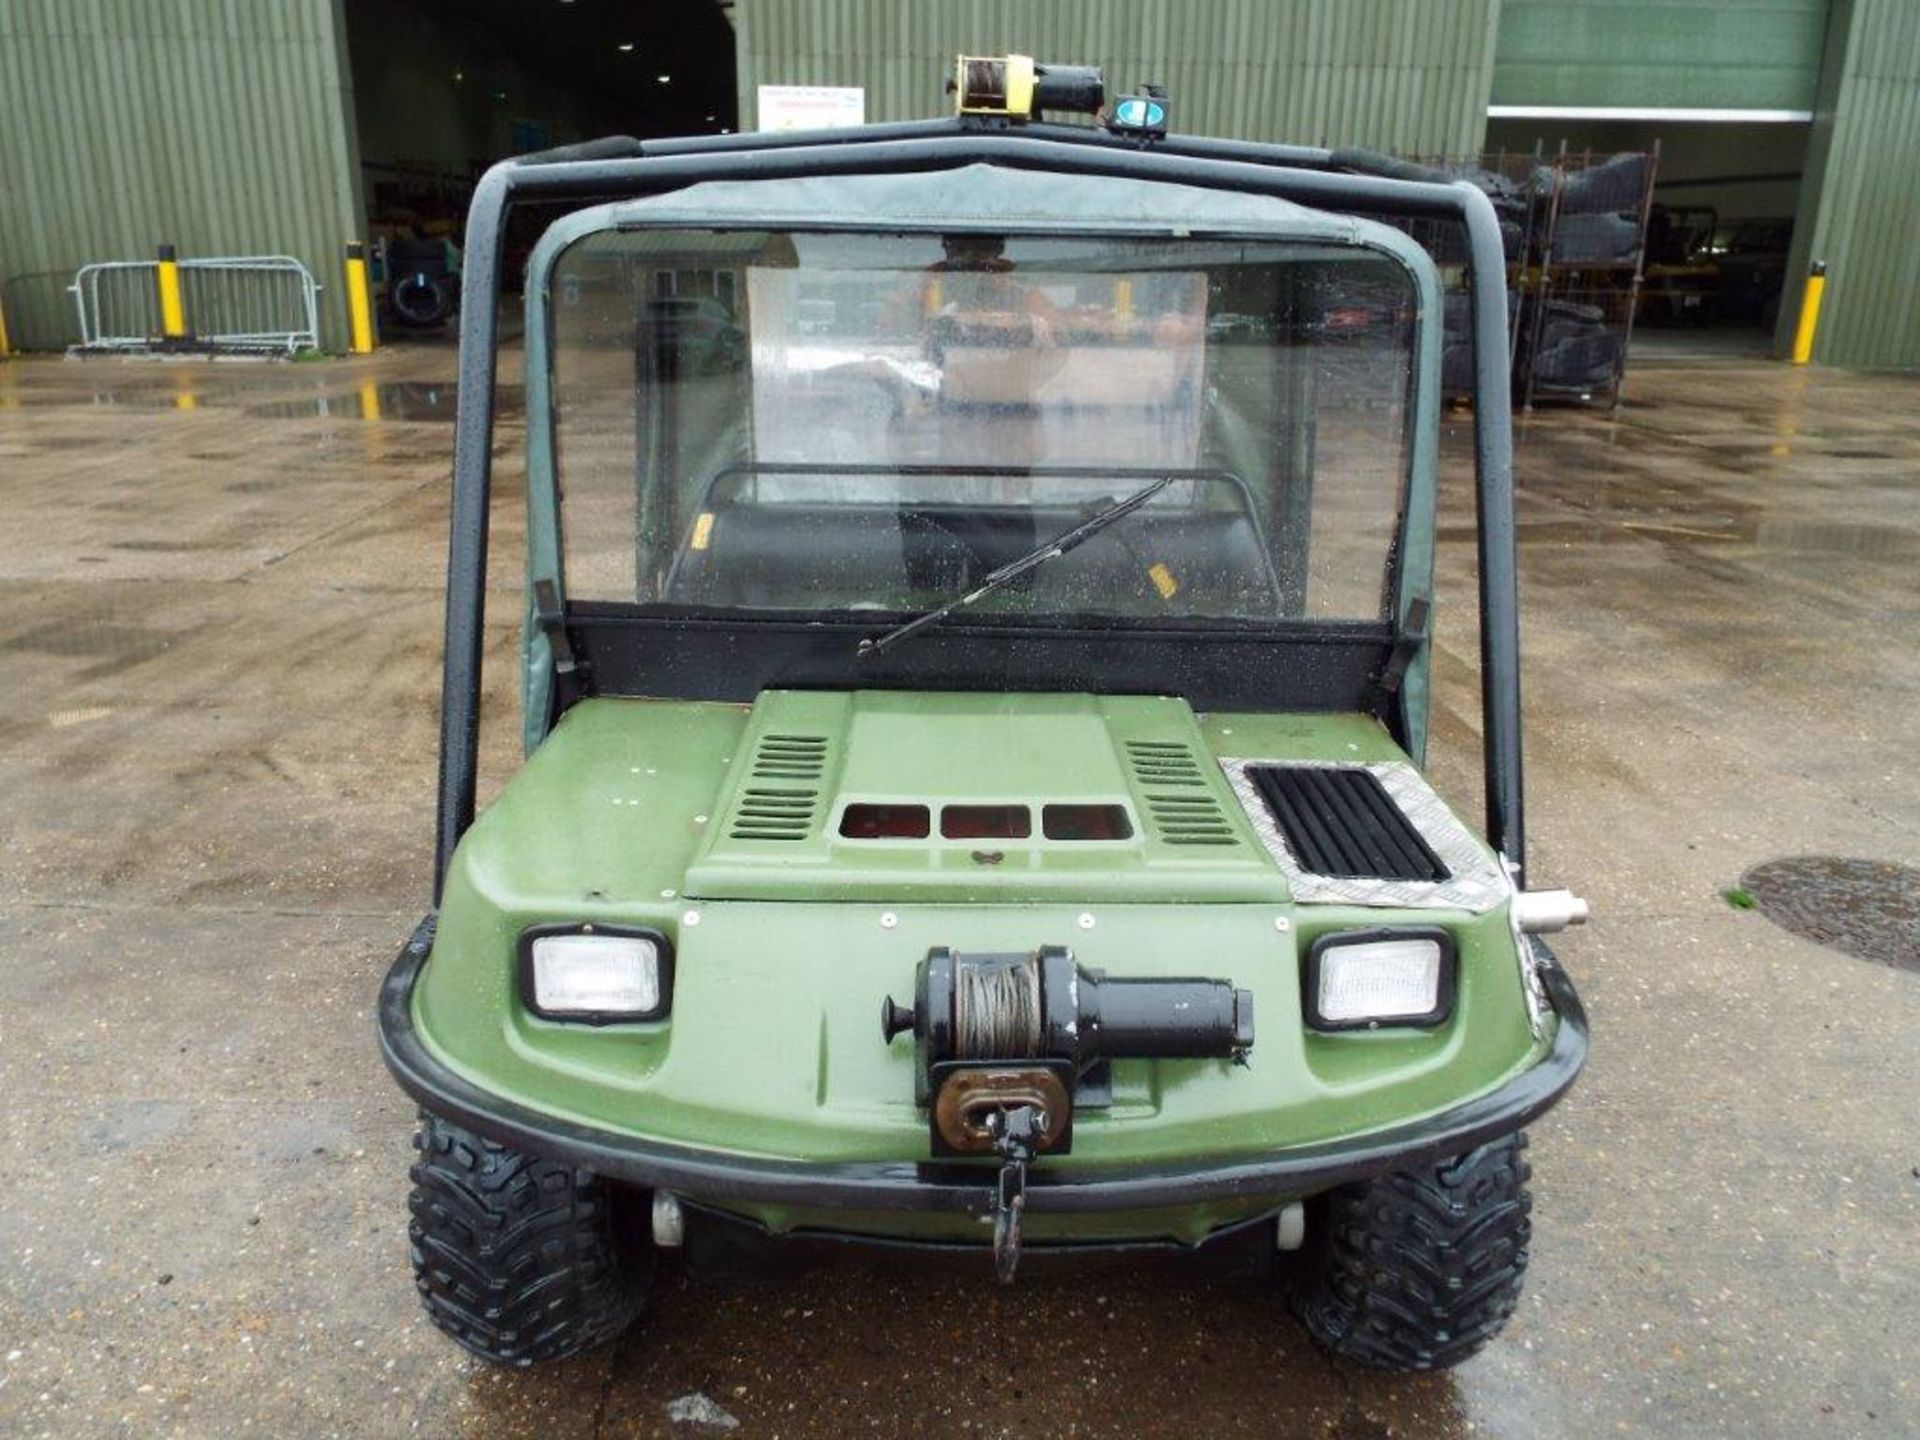 Argocat 8x8 V890-23 Amphibious ATV with Canopy and Front + Rear Winches - Bild 2 aus 25